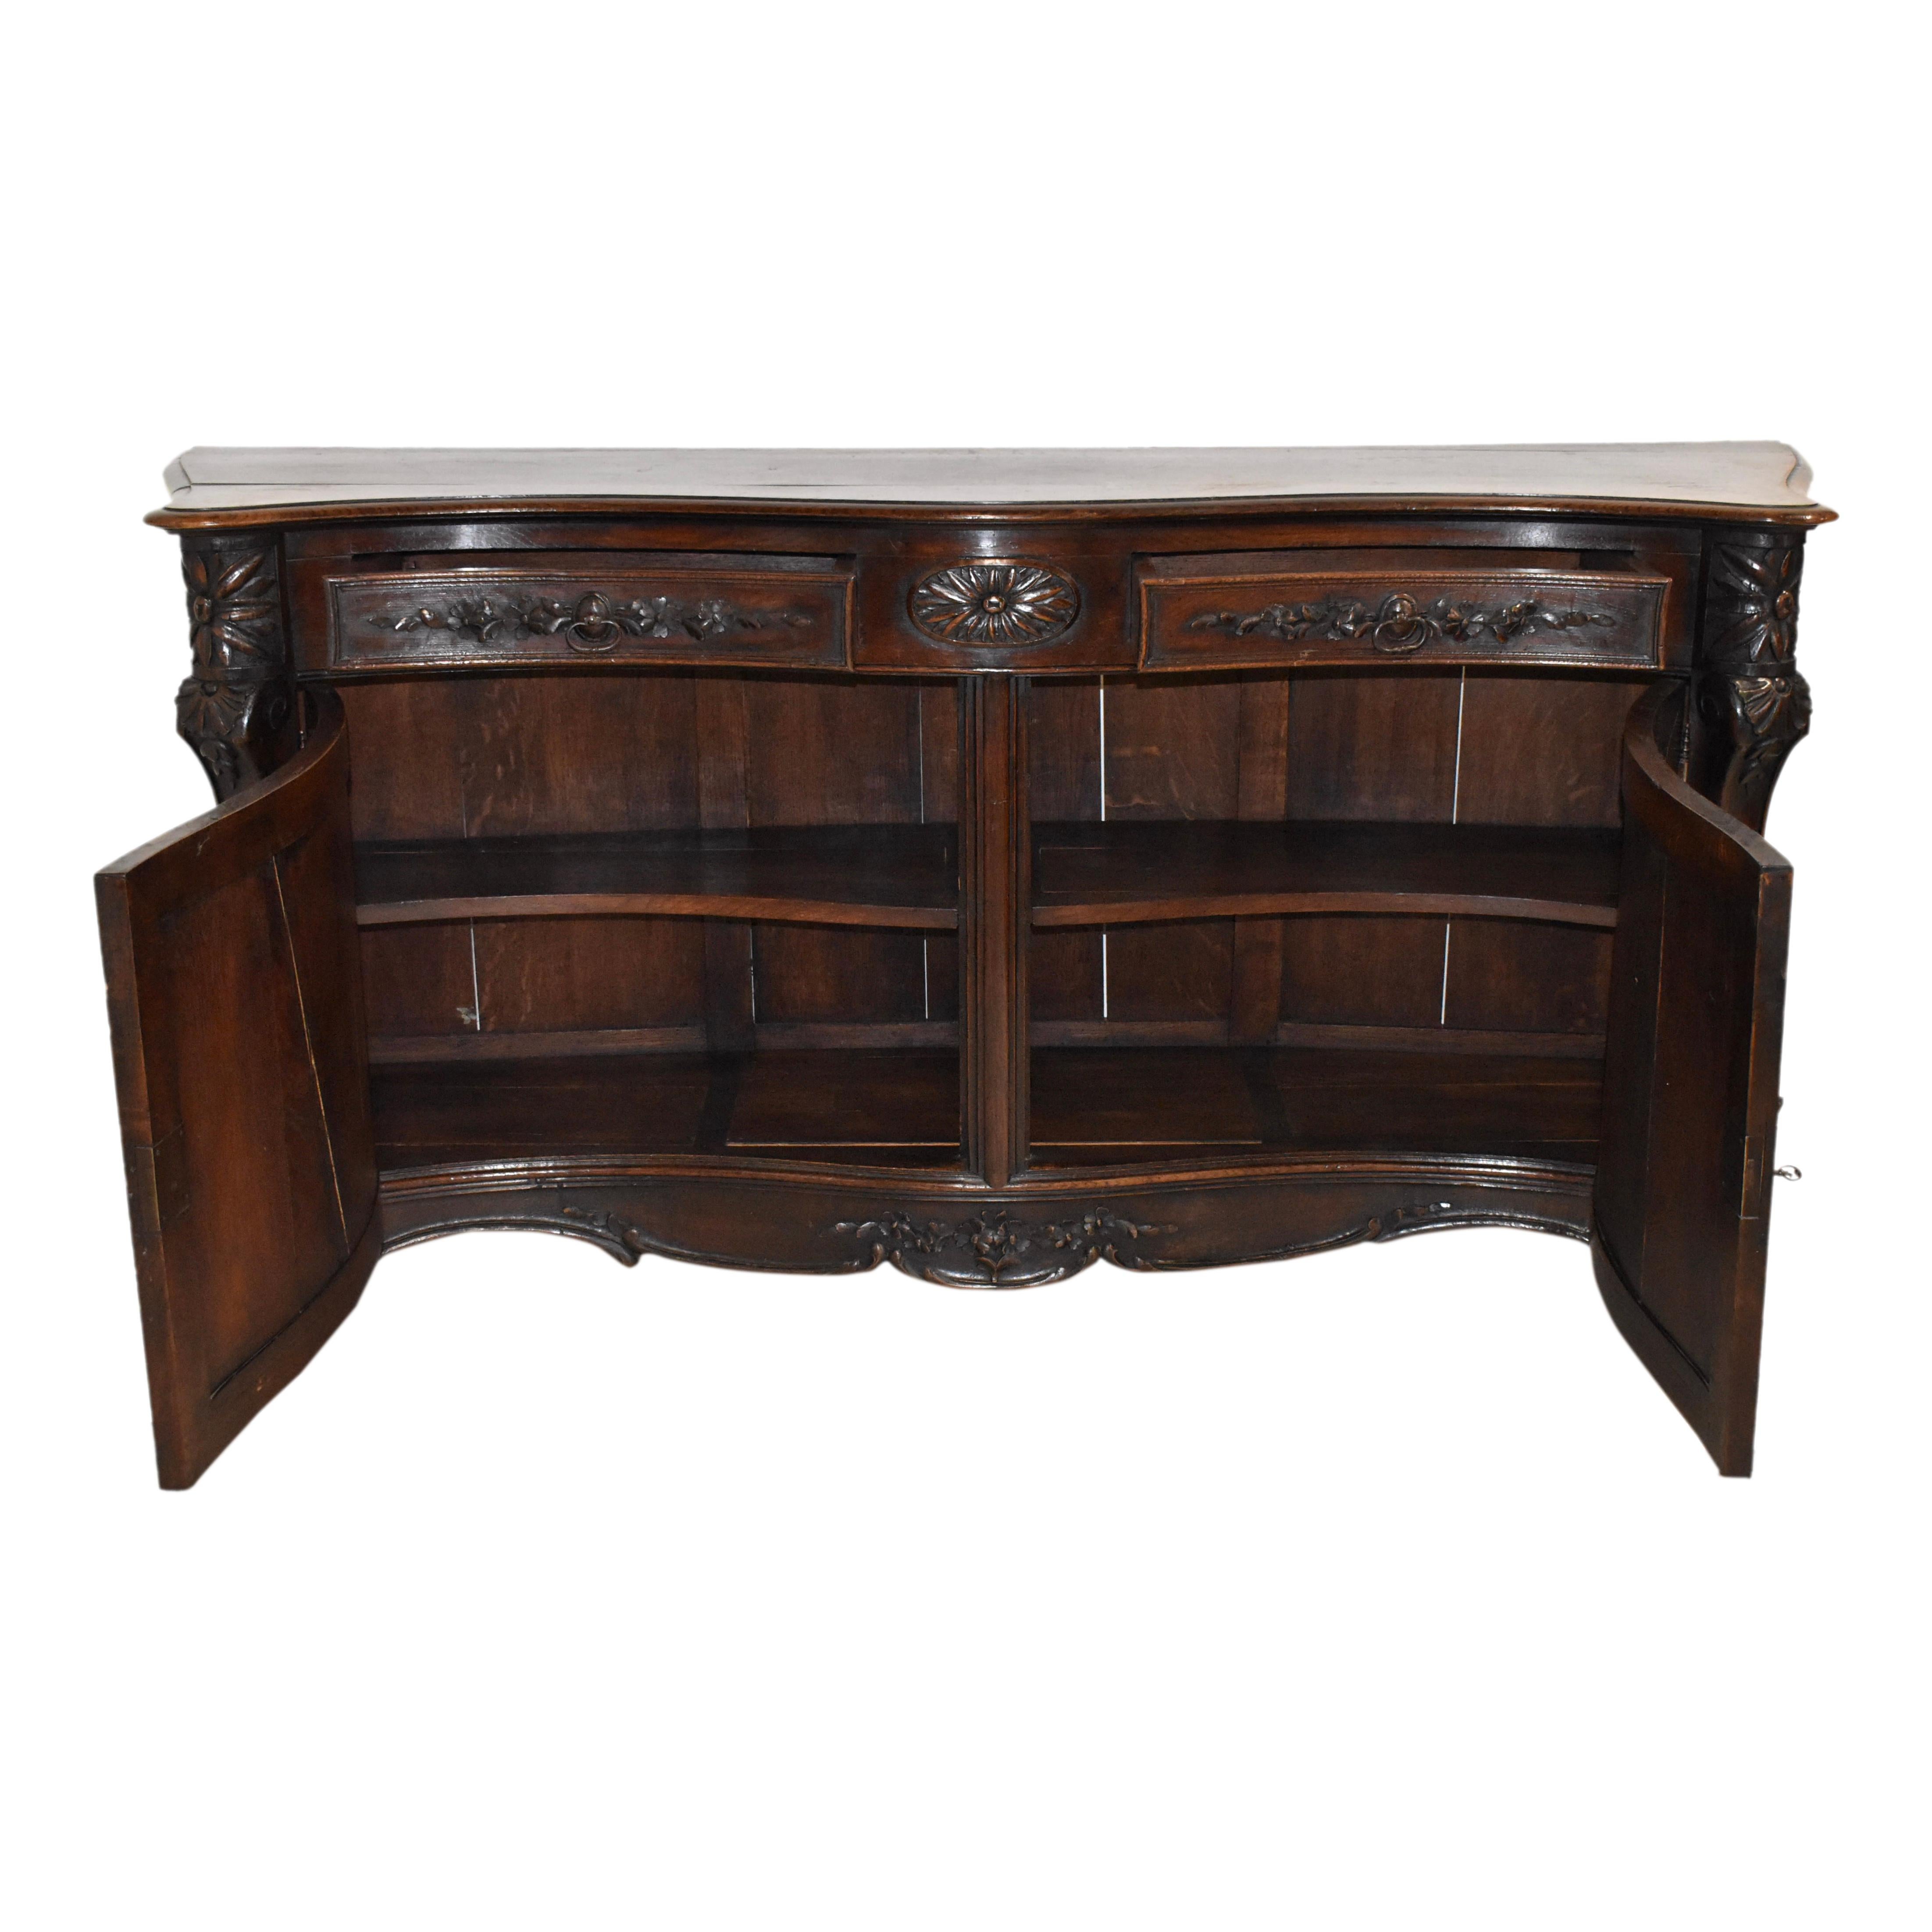 The graceful lines of a serpentine front, rounded corners, cabriole legs, and scrolled carvings are paired with solid oak construction finished in a dark stain with a lovely patina, creating this magnificent sideboard that is both elegant and bold.